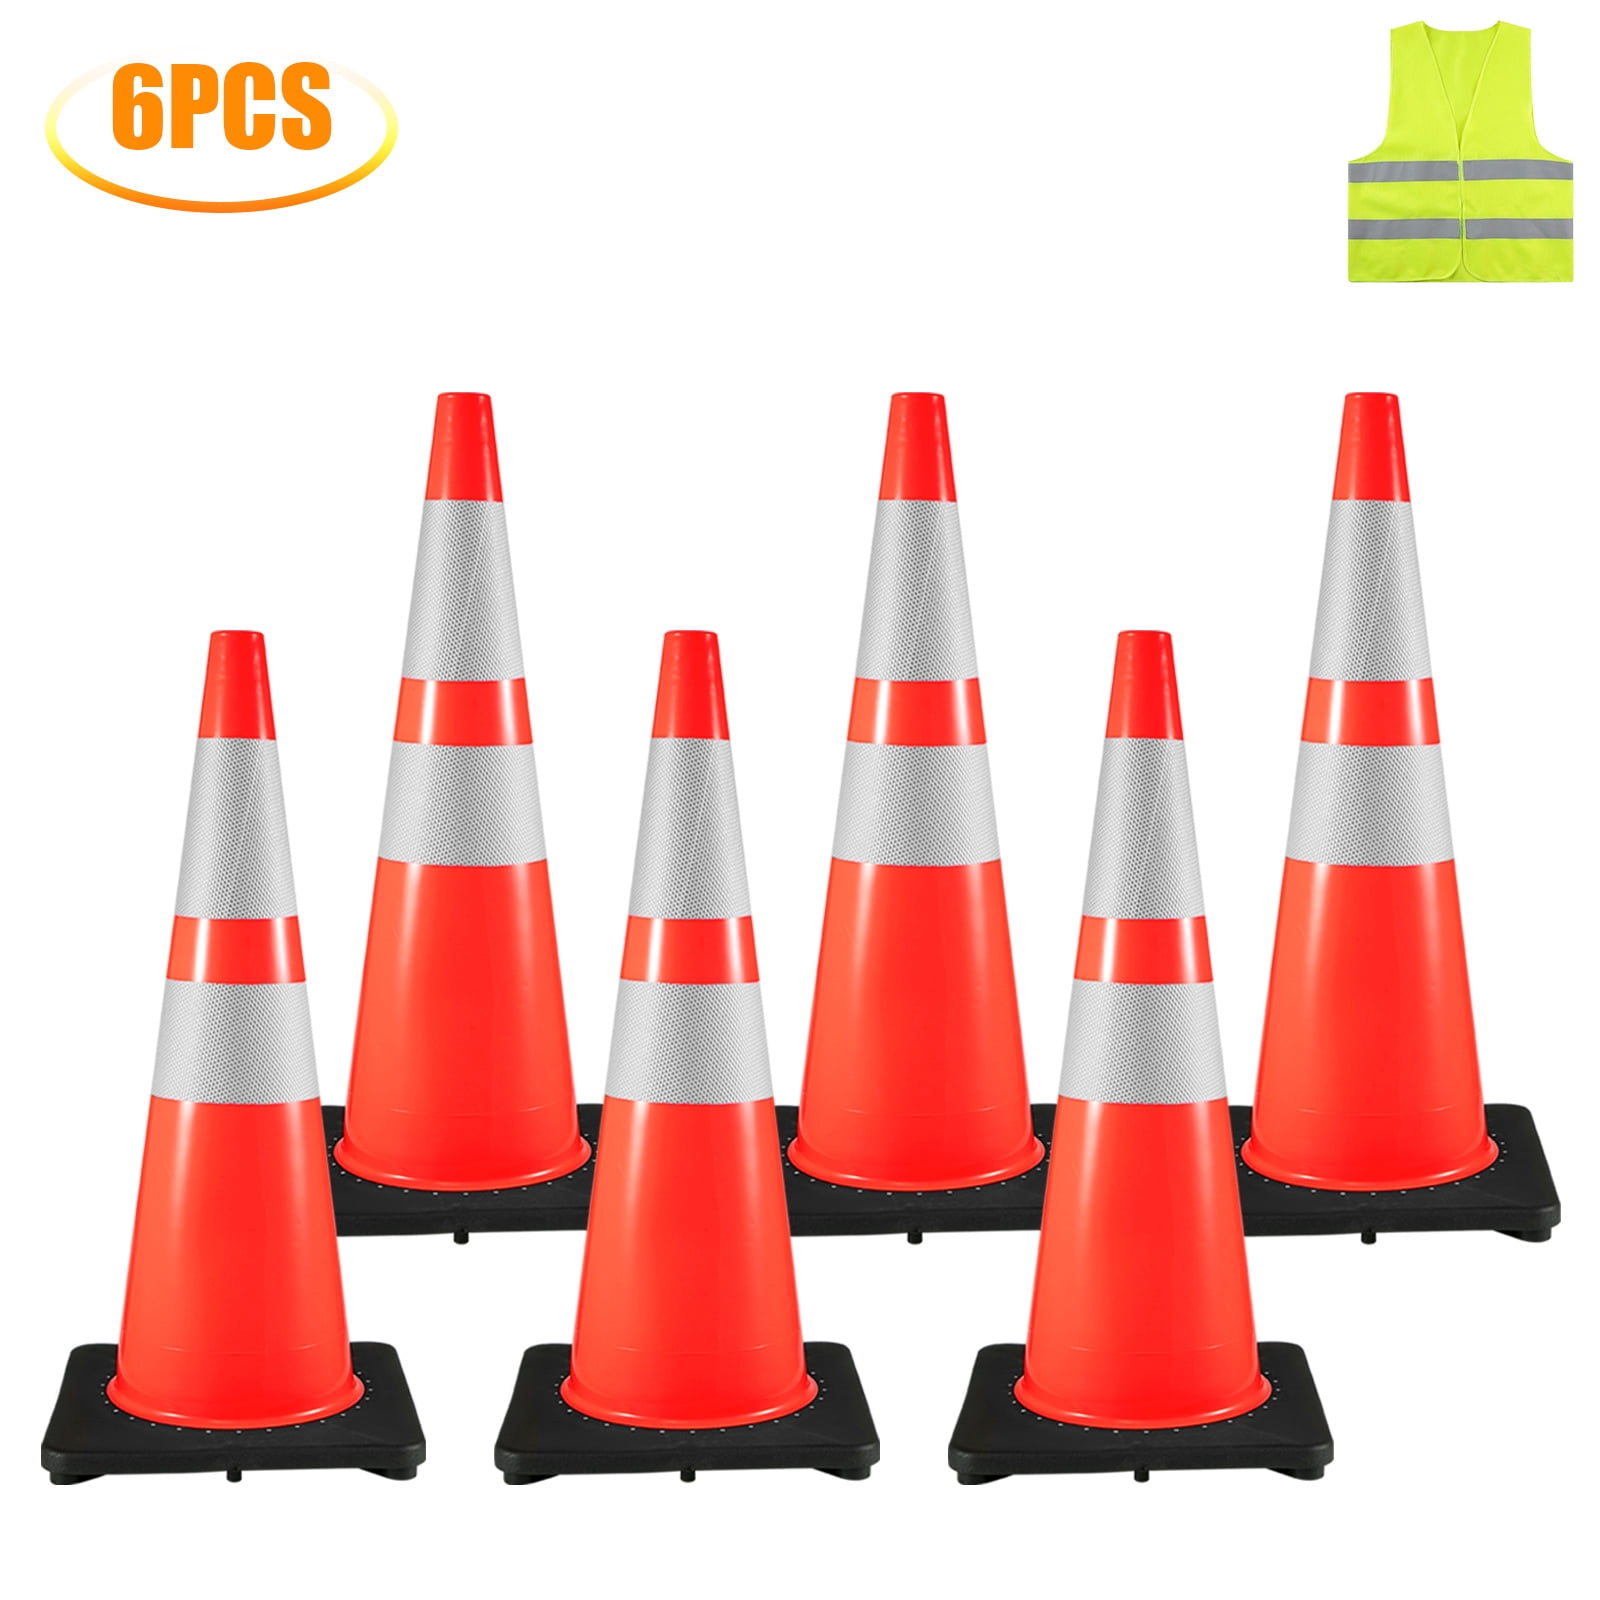 28 Traffic Safety Cone Black Base, 7 lbs - Traffic Cones For Less